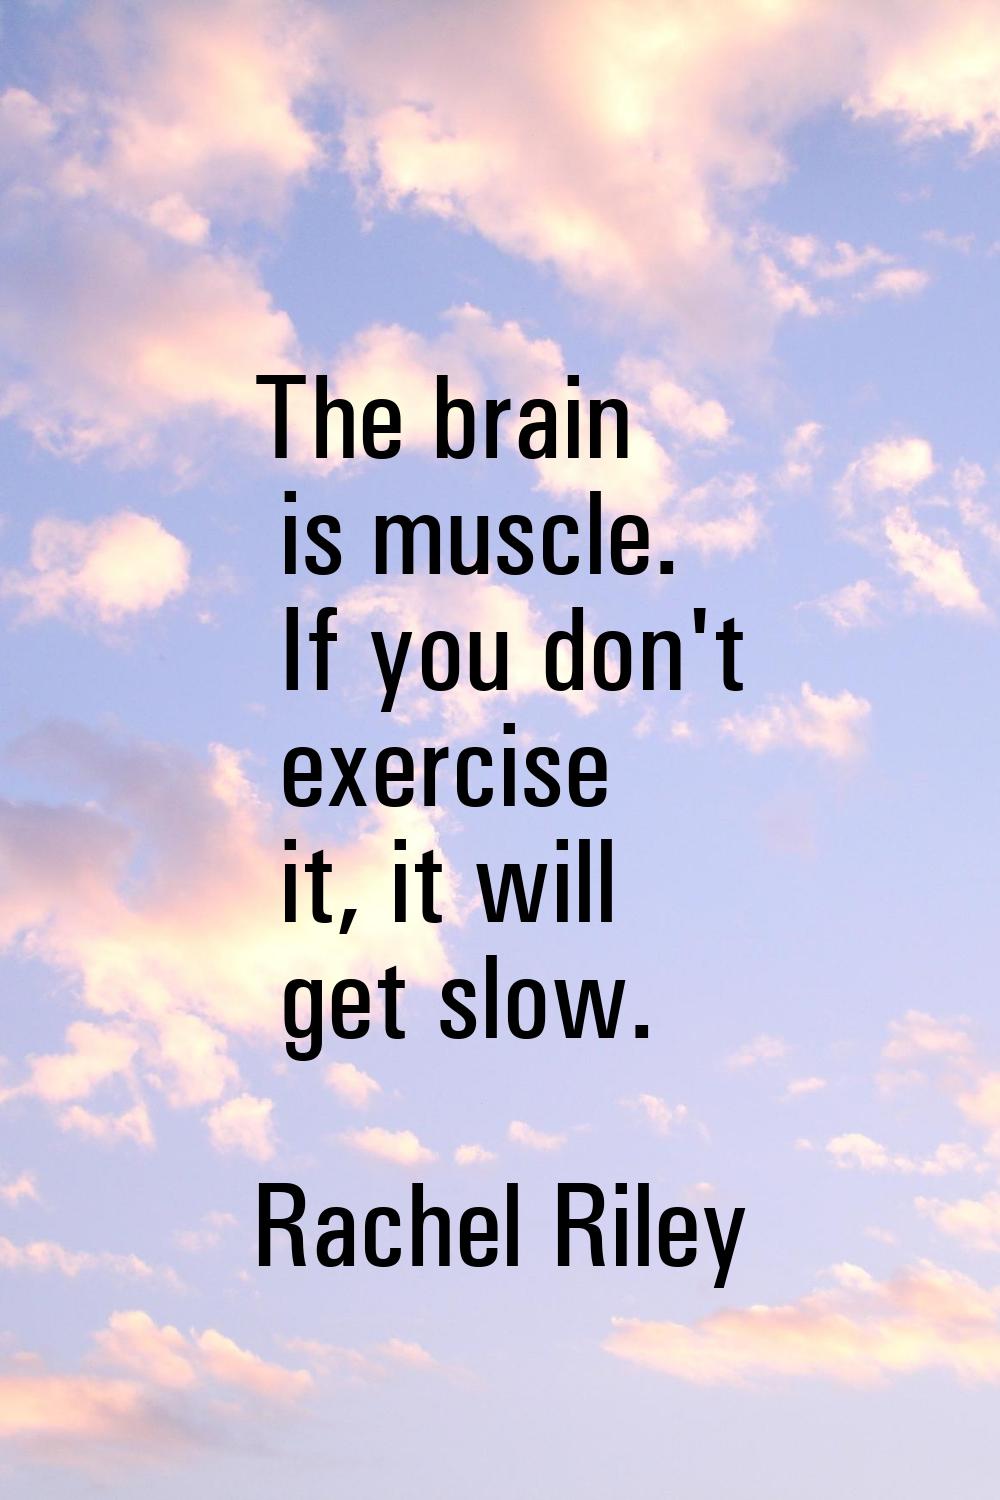 The brain is muscle. If you don't exercise it, it will get slow.